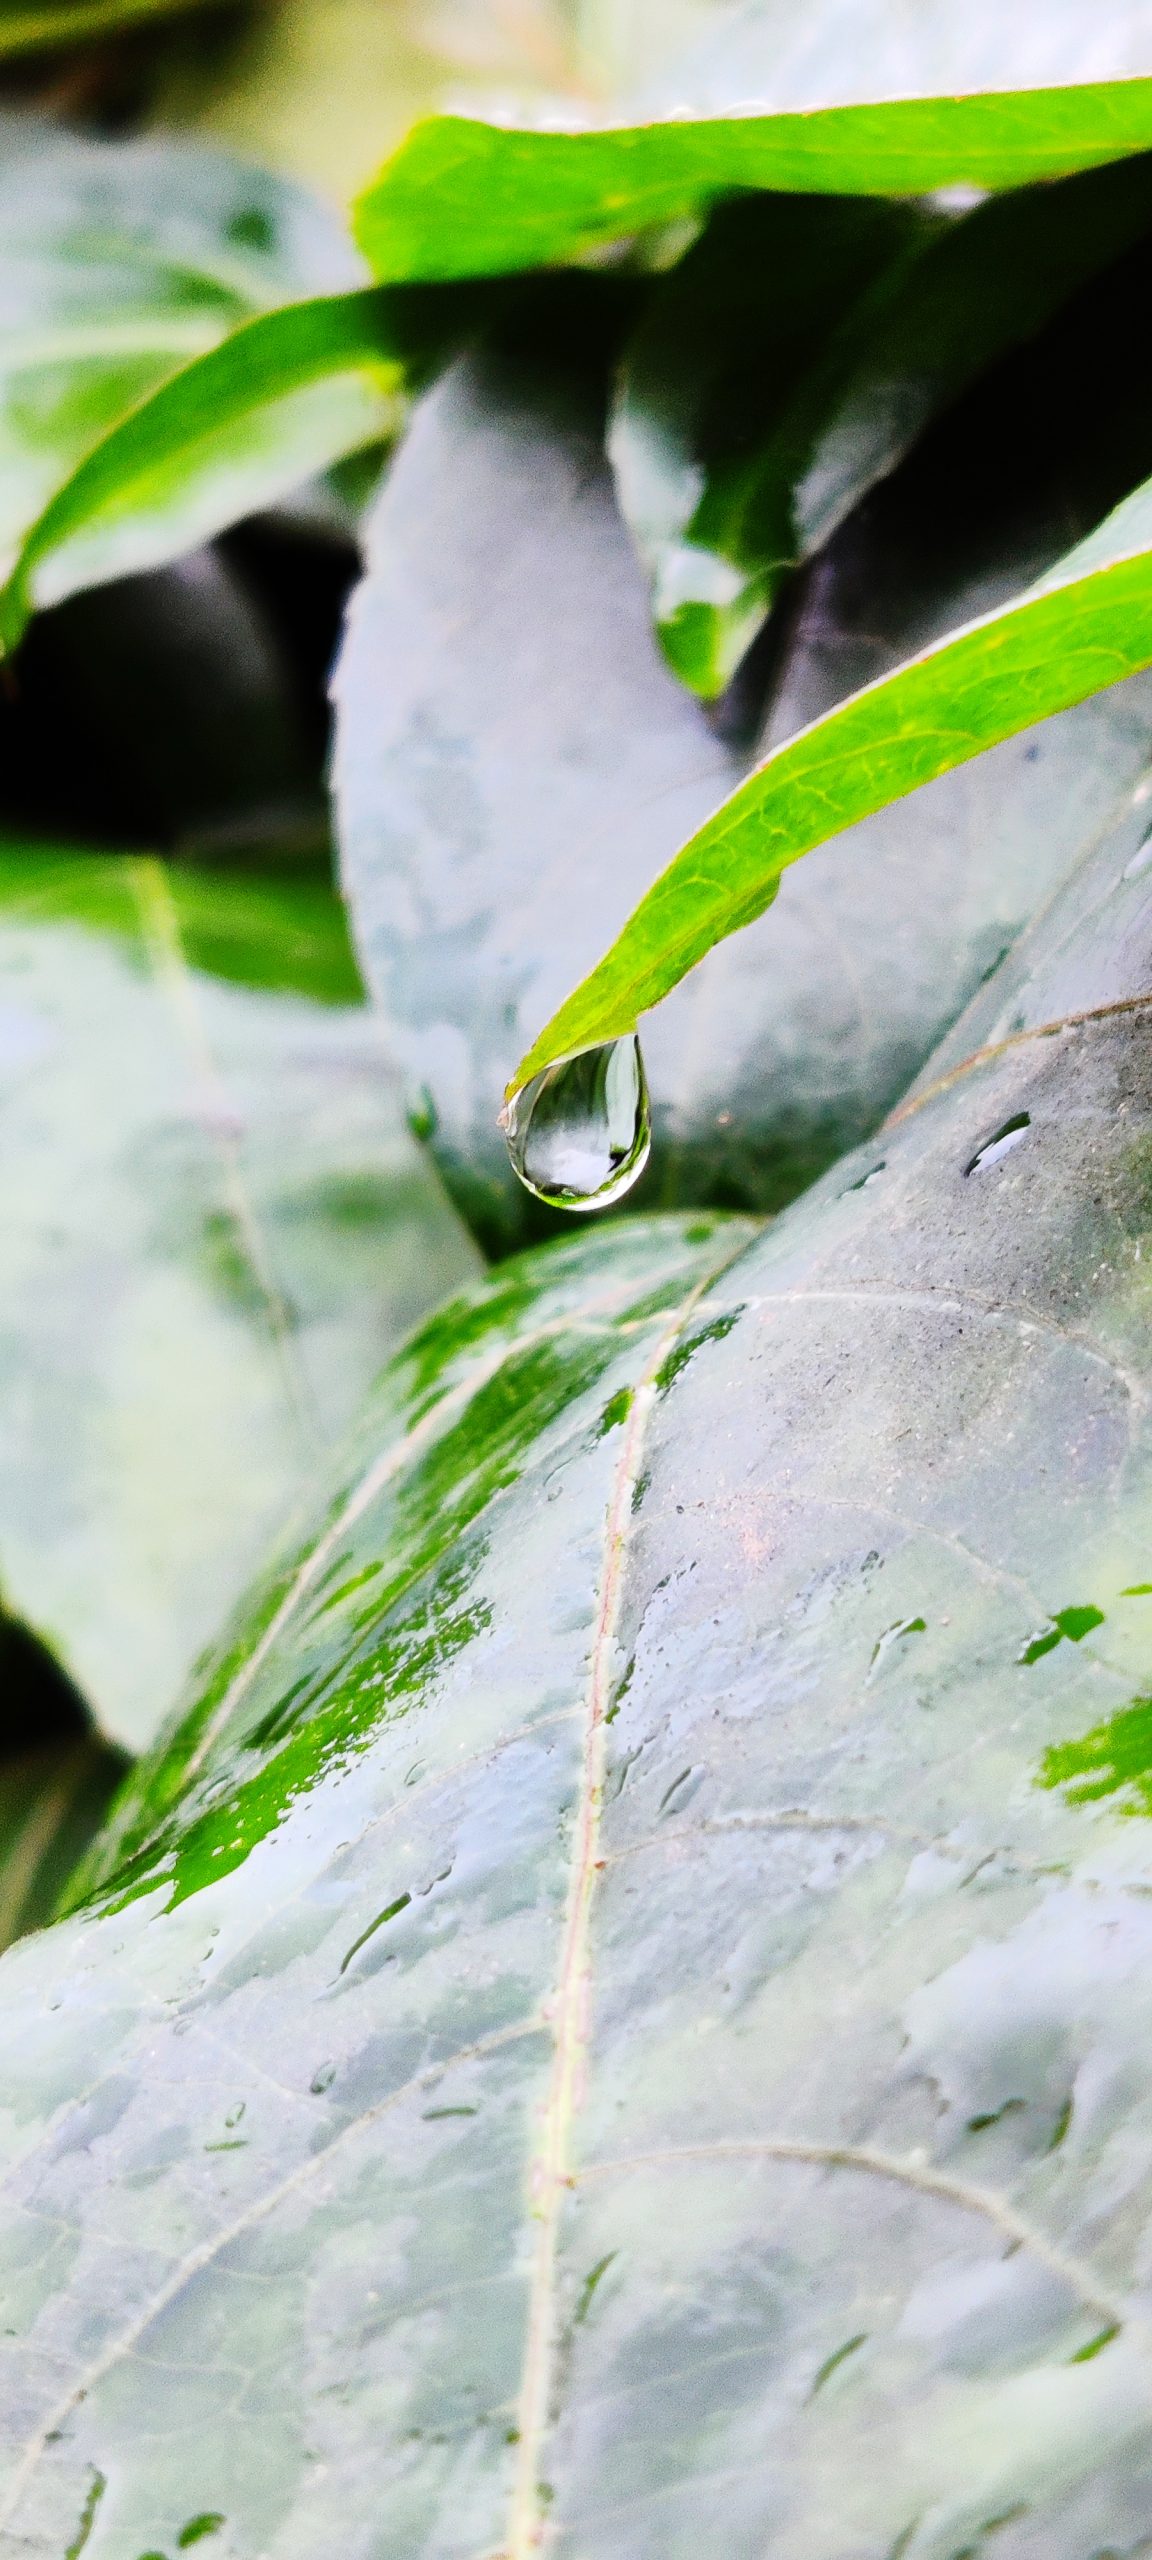 Water drops on plant leaf